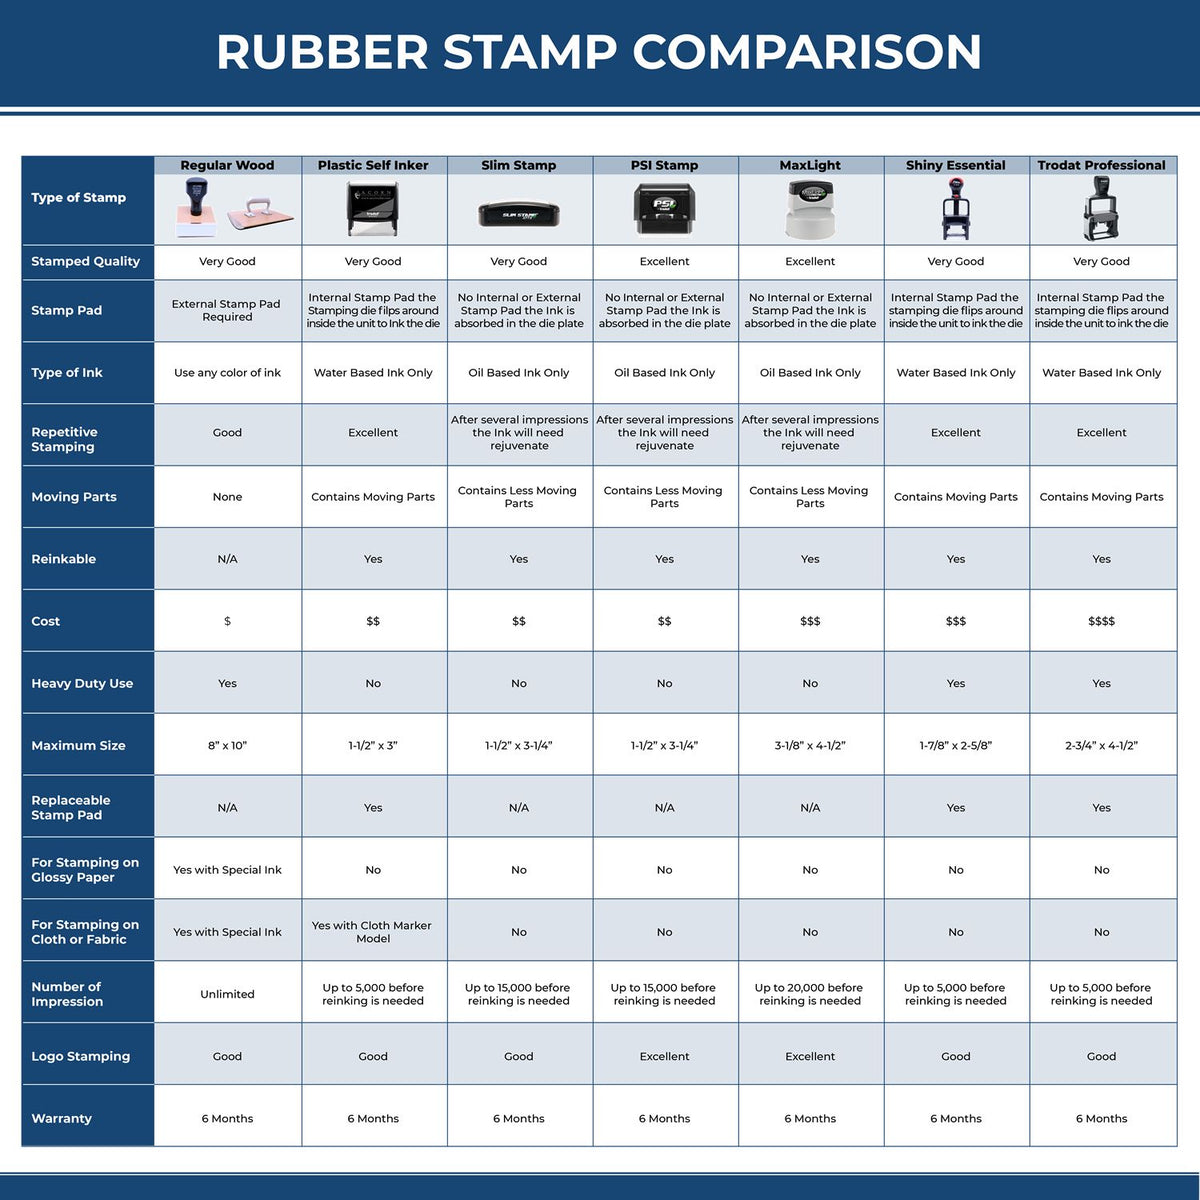 A comparison chart for the different types of mount models available for the Heavy-Duty Louisiana Rectangular Notary Stamp.